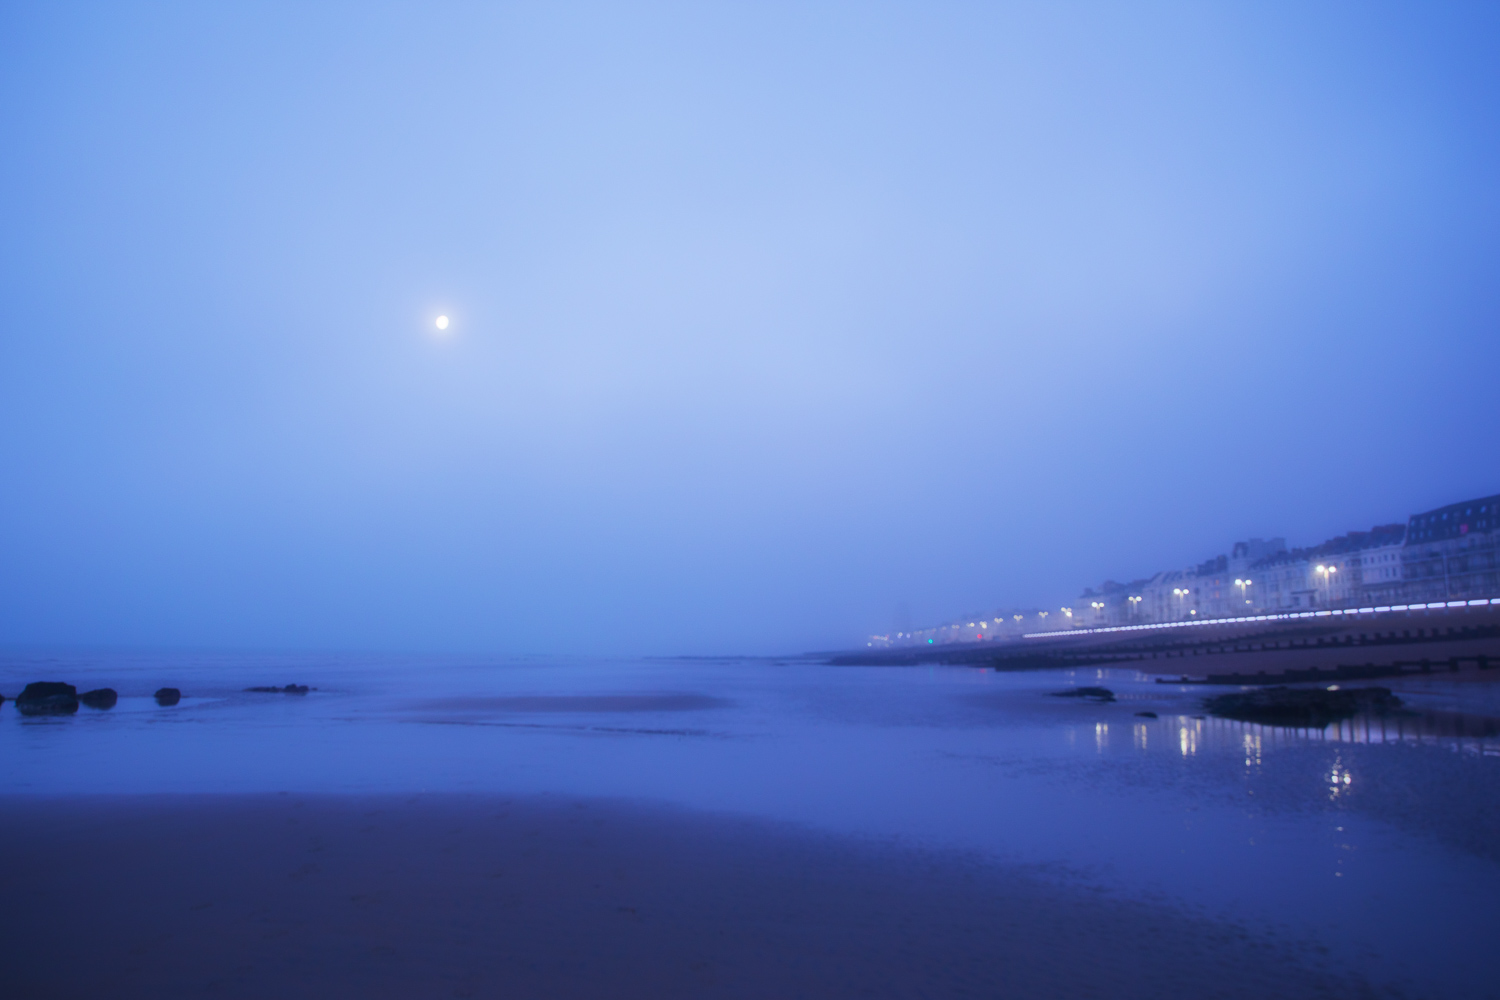 Seafront in mist and moonlight